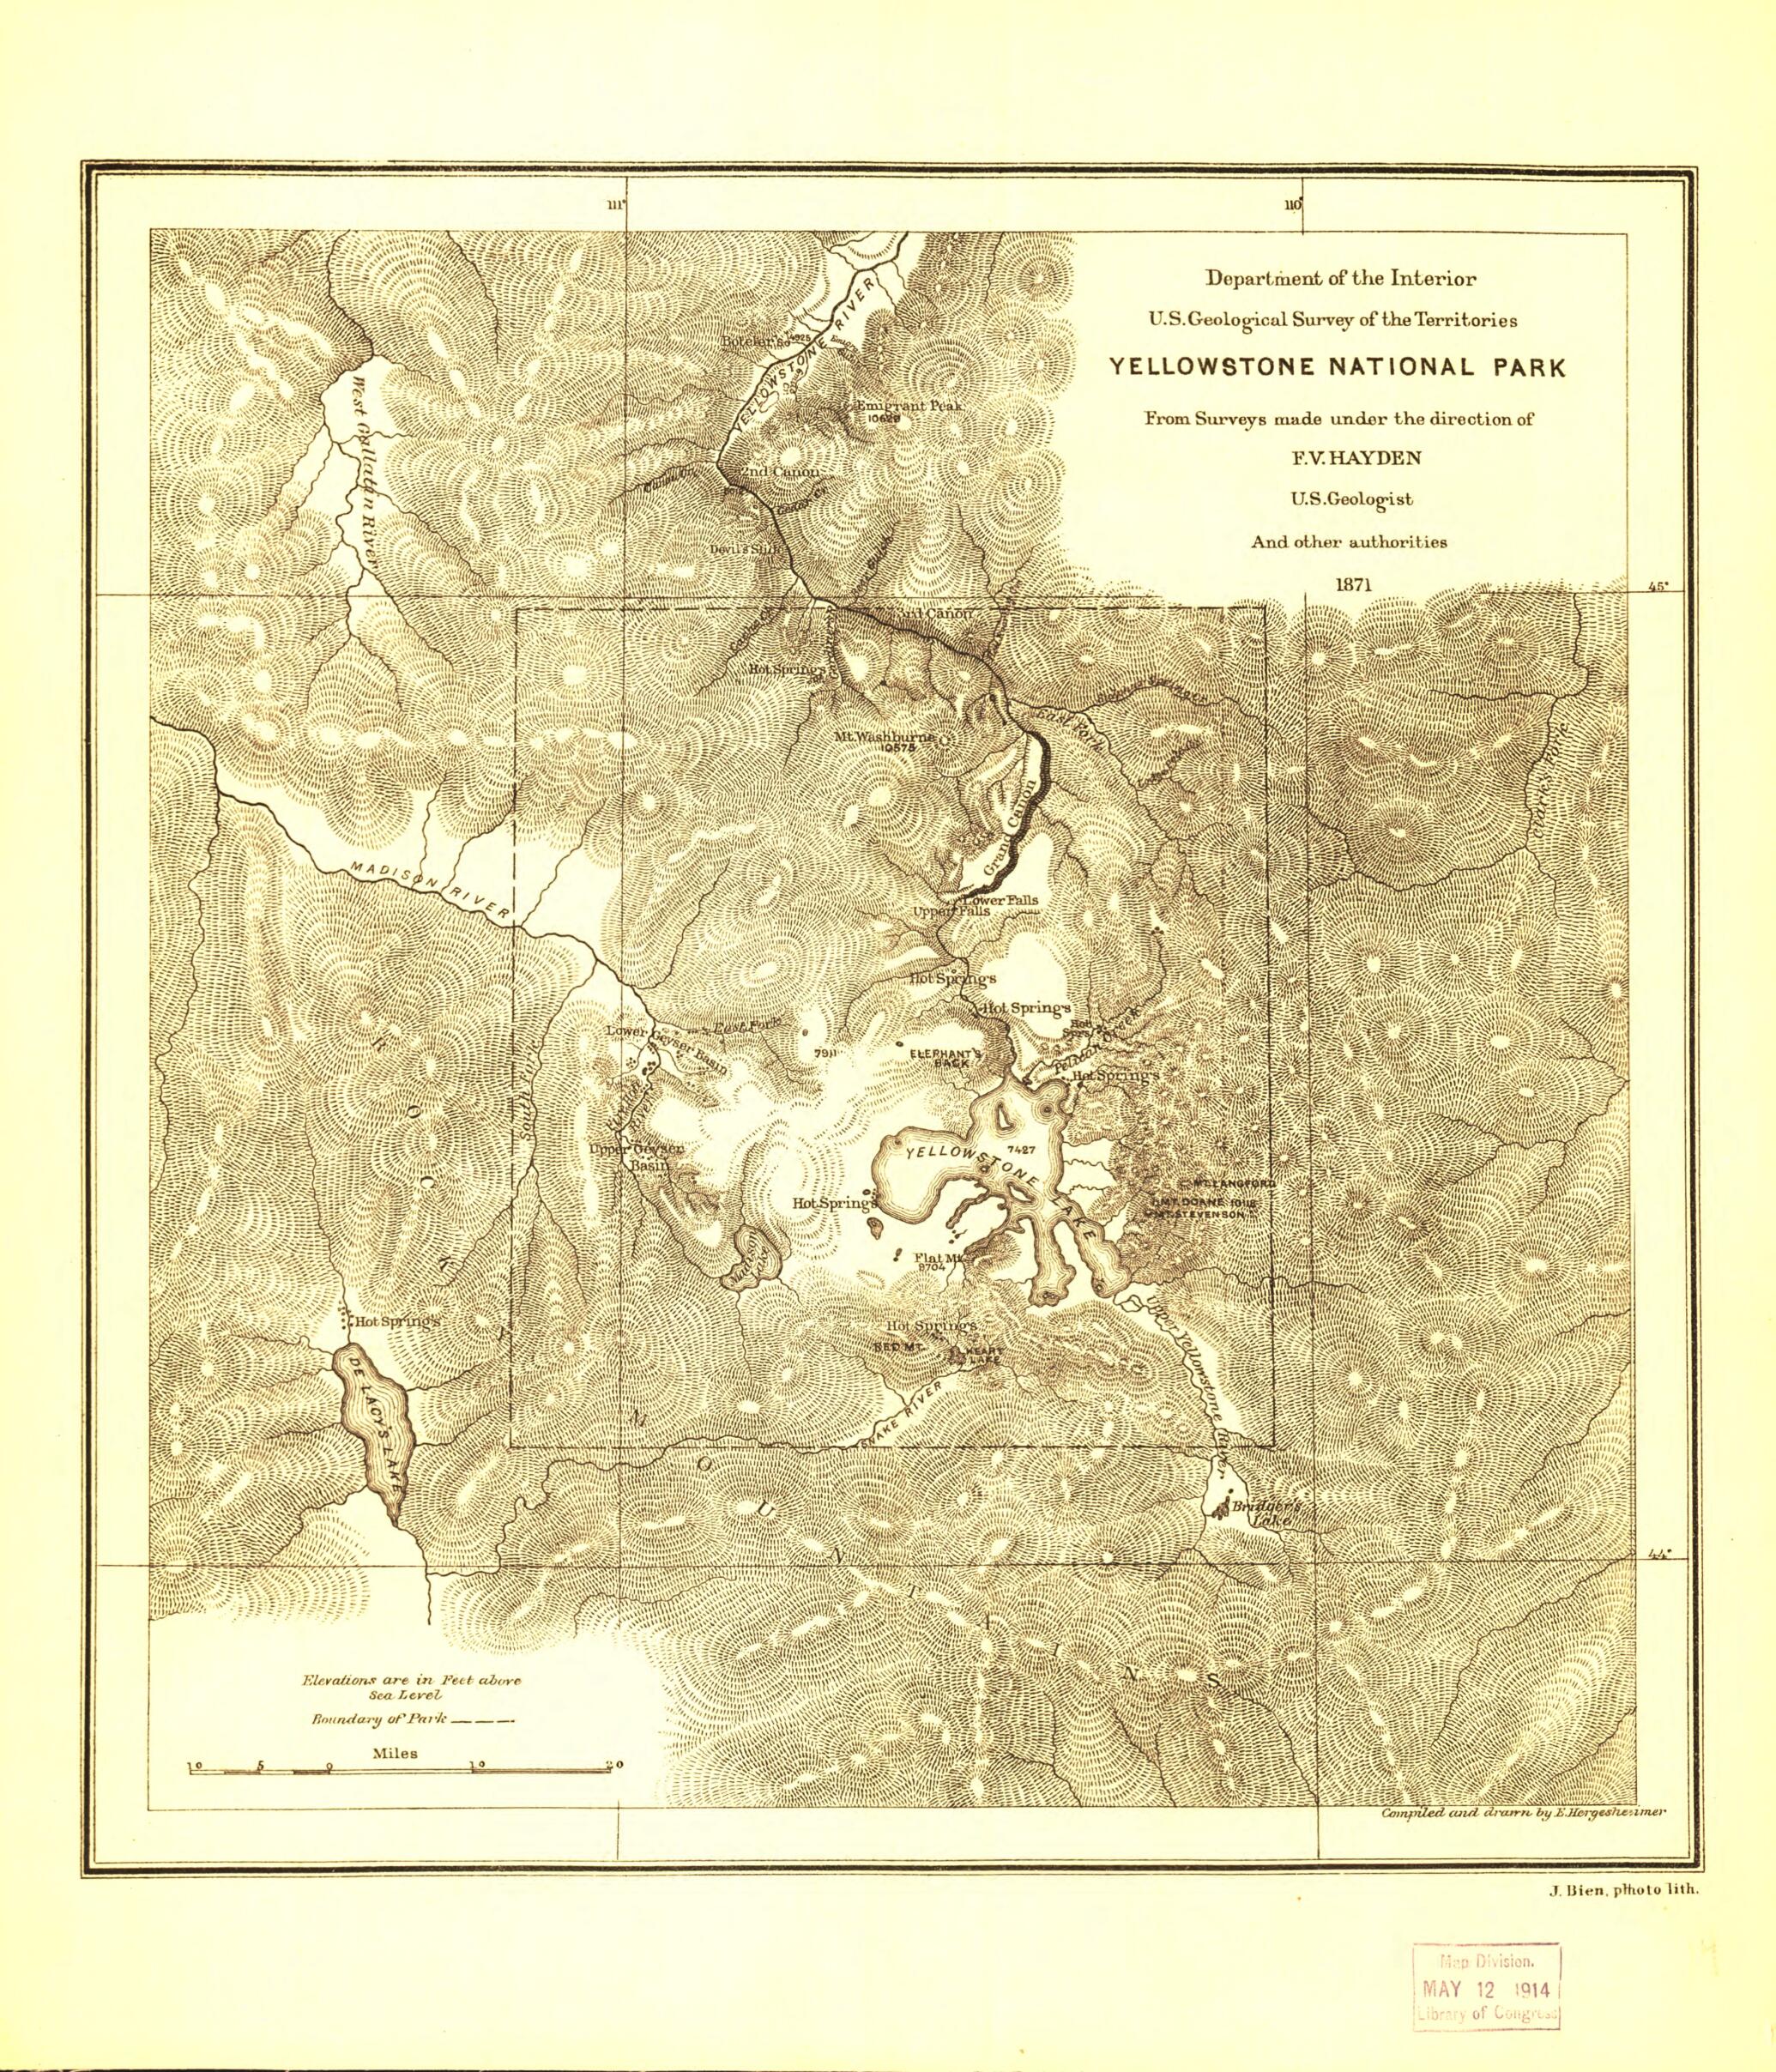 This old map of Yellowstone National Park : from 1871 was created by Julius Bien,  Geological Survey of the Territories (U.S.), F.V. (Ferdinand Vandeveer) Hayden, E. (Edwin) Hergesheimer,  United States. Department of the Interior in 1871